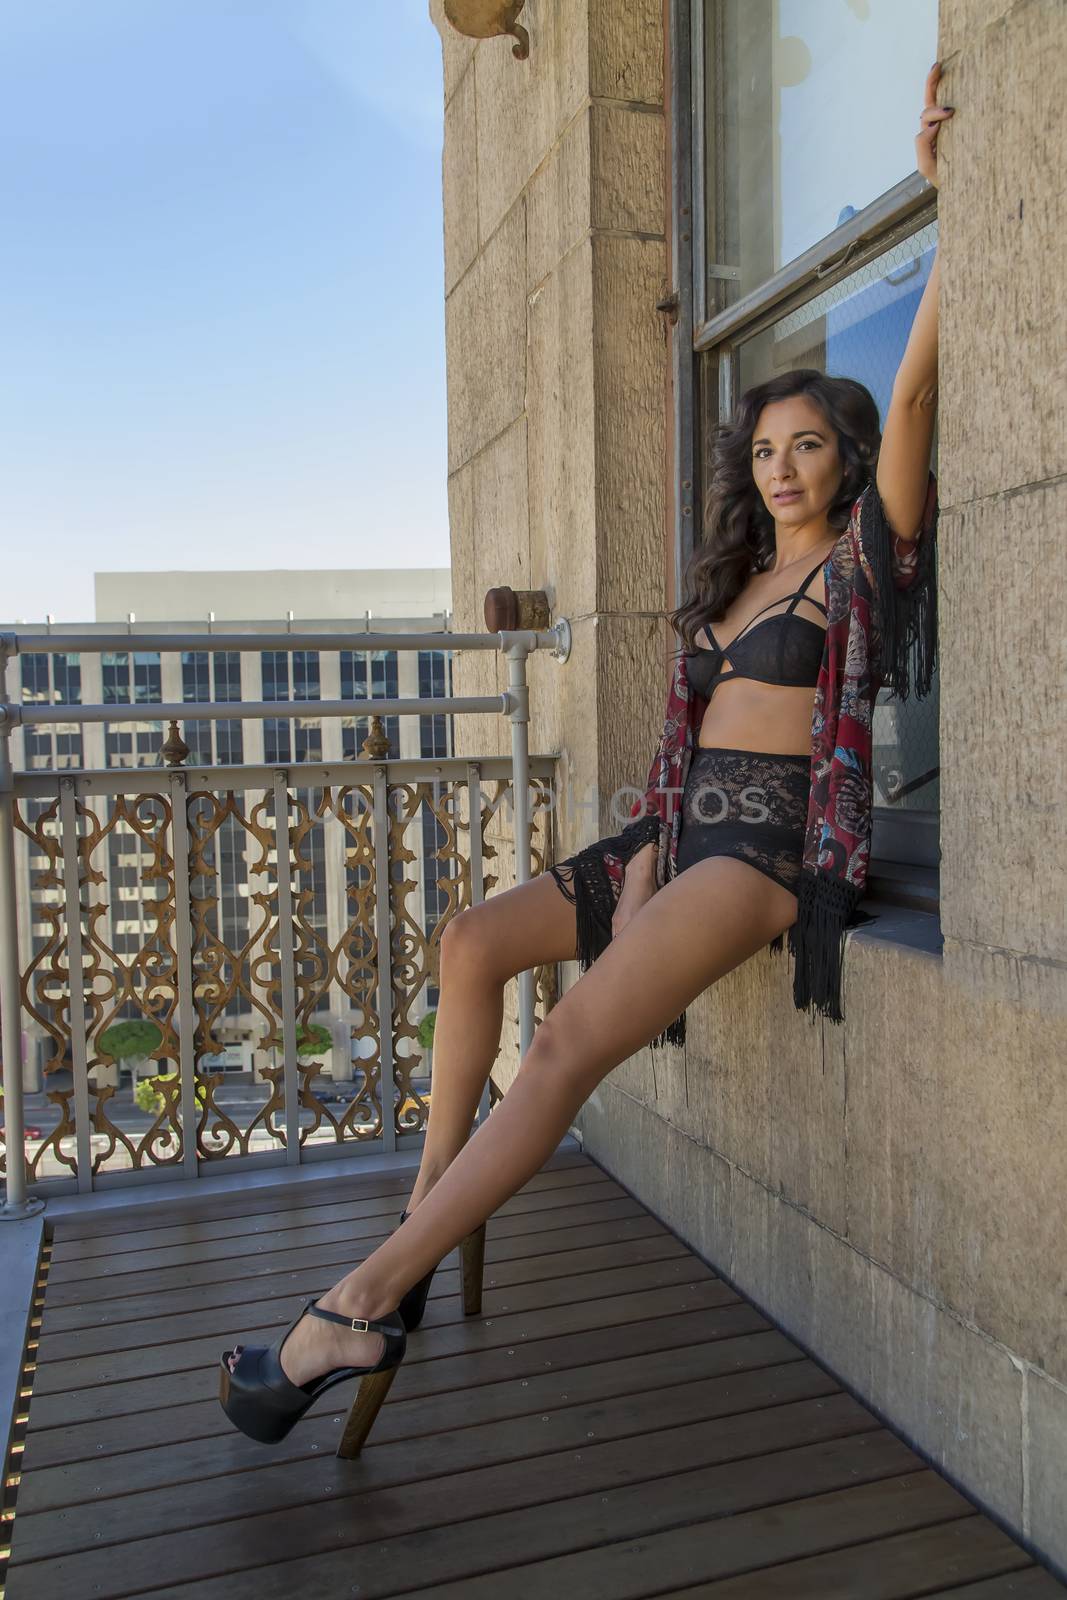 A brunette model on a balcony in a city environment